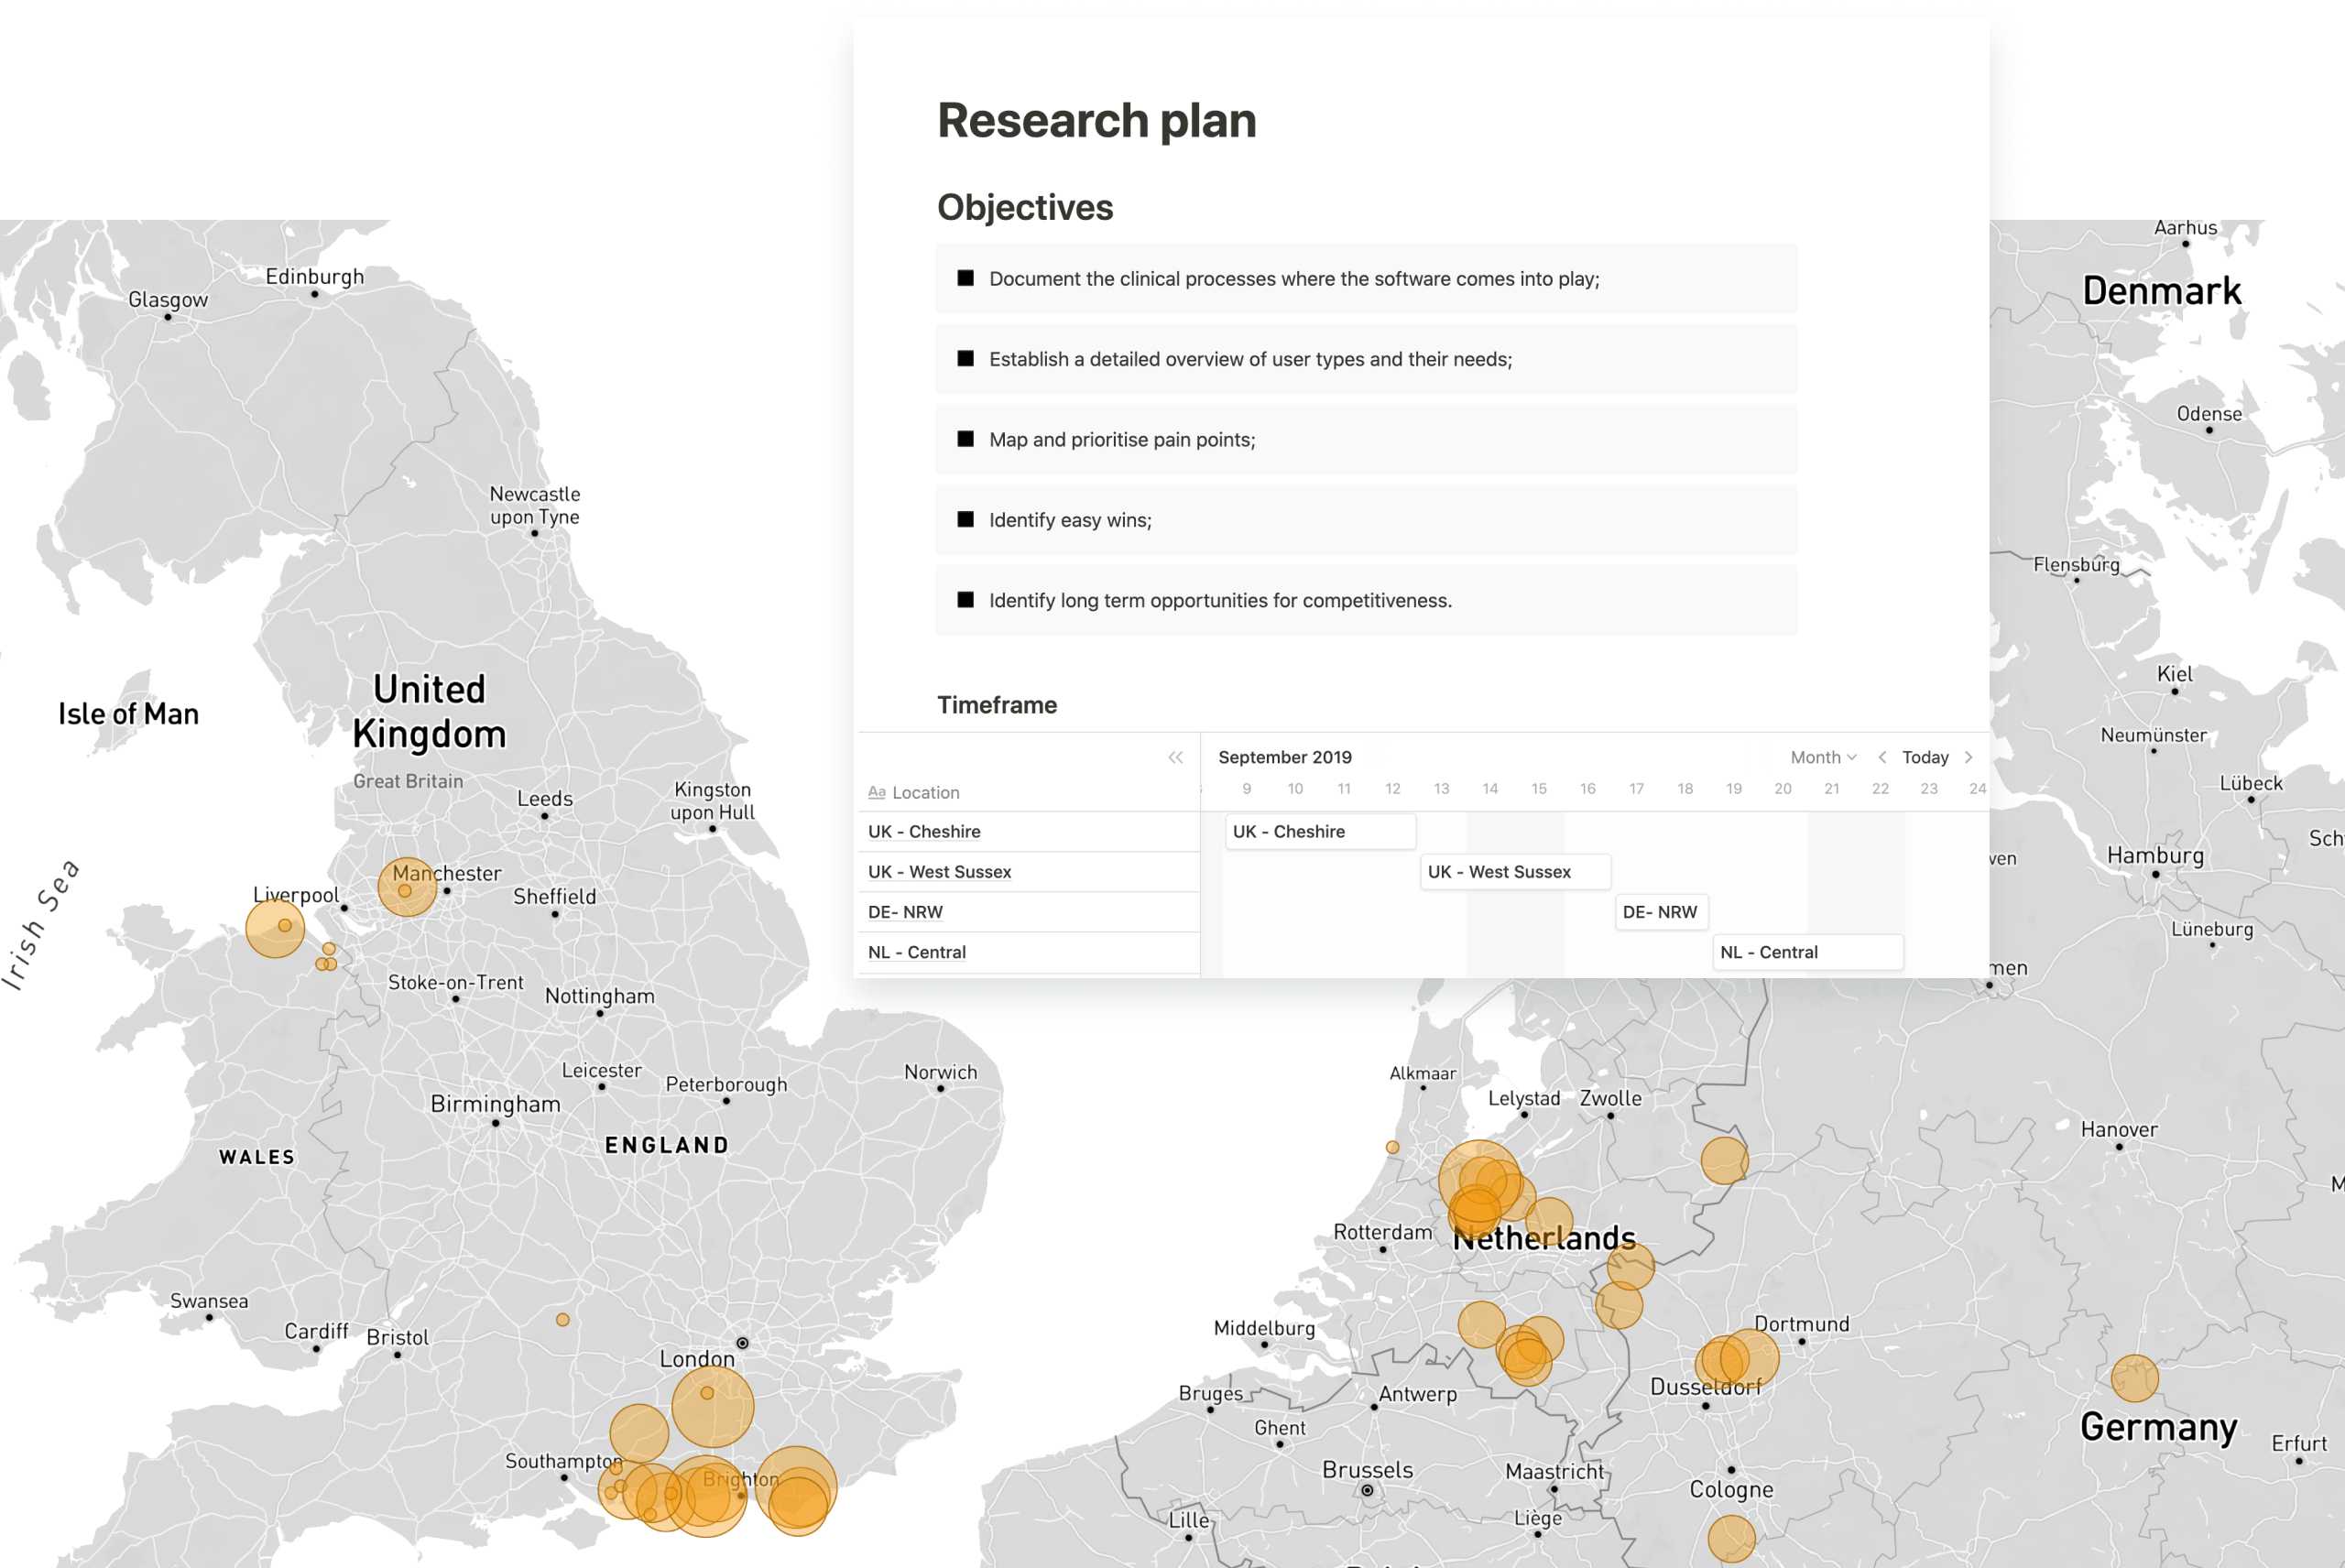 Map of the UK and Germany with locations of user research highlighted